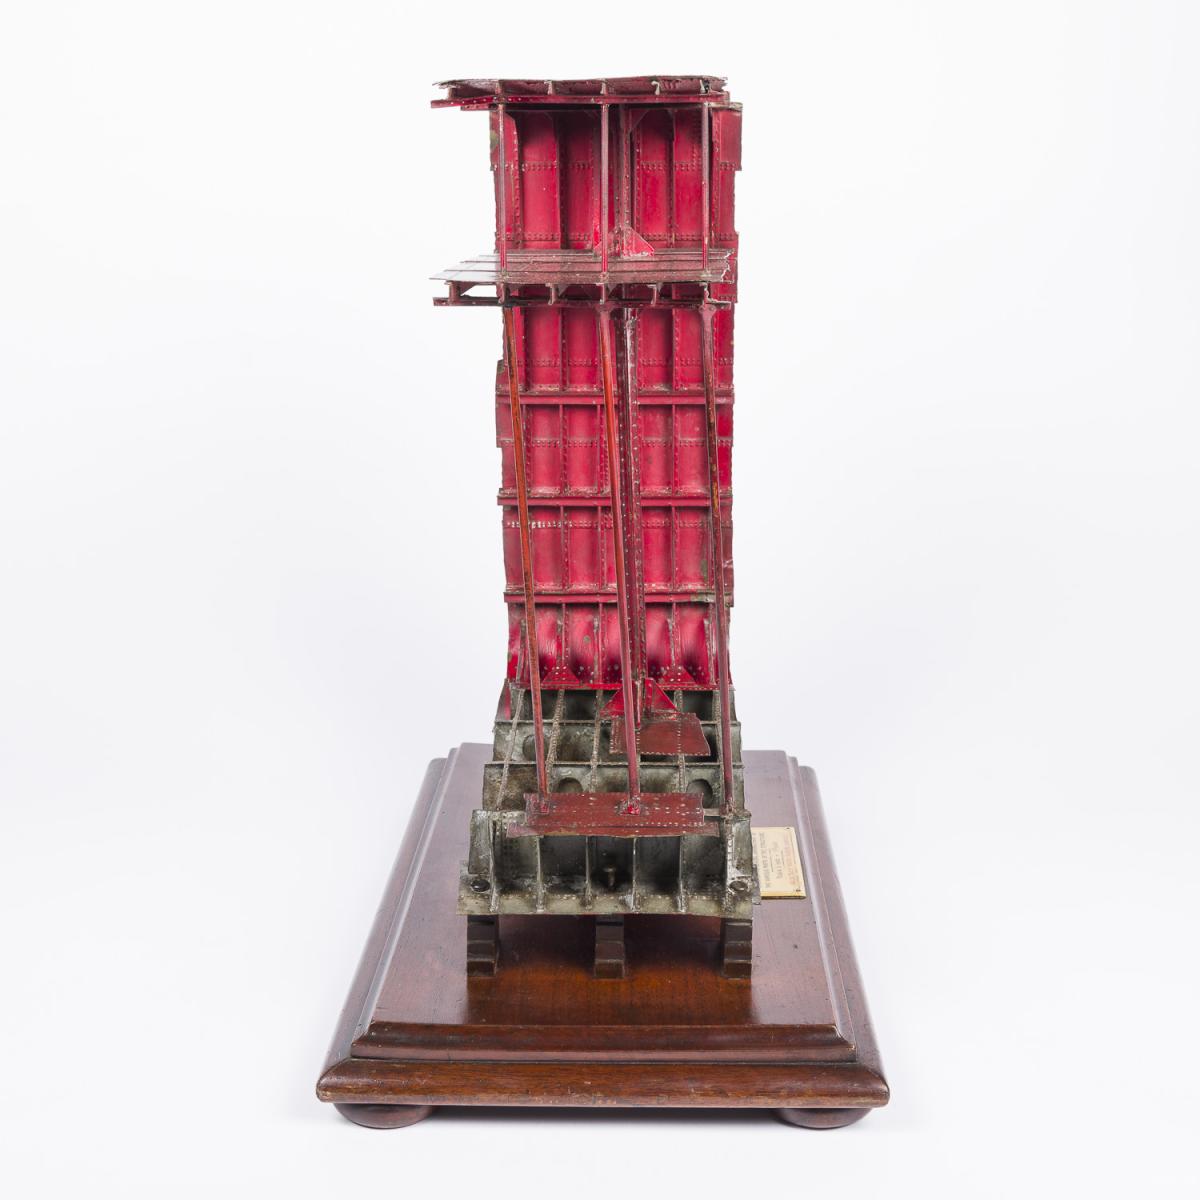 Shipbuilder's model of half a midship section of a steel steamer